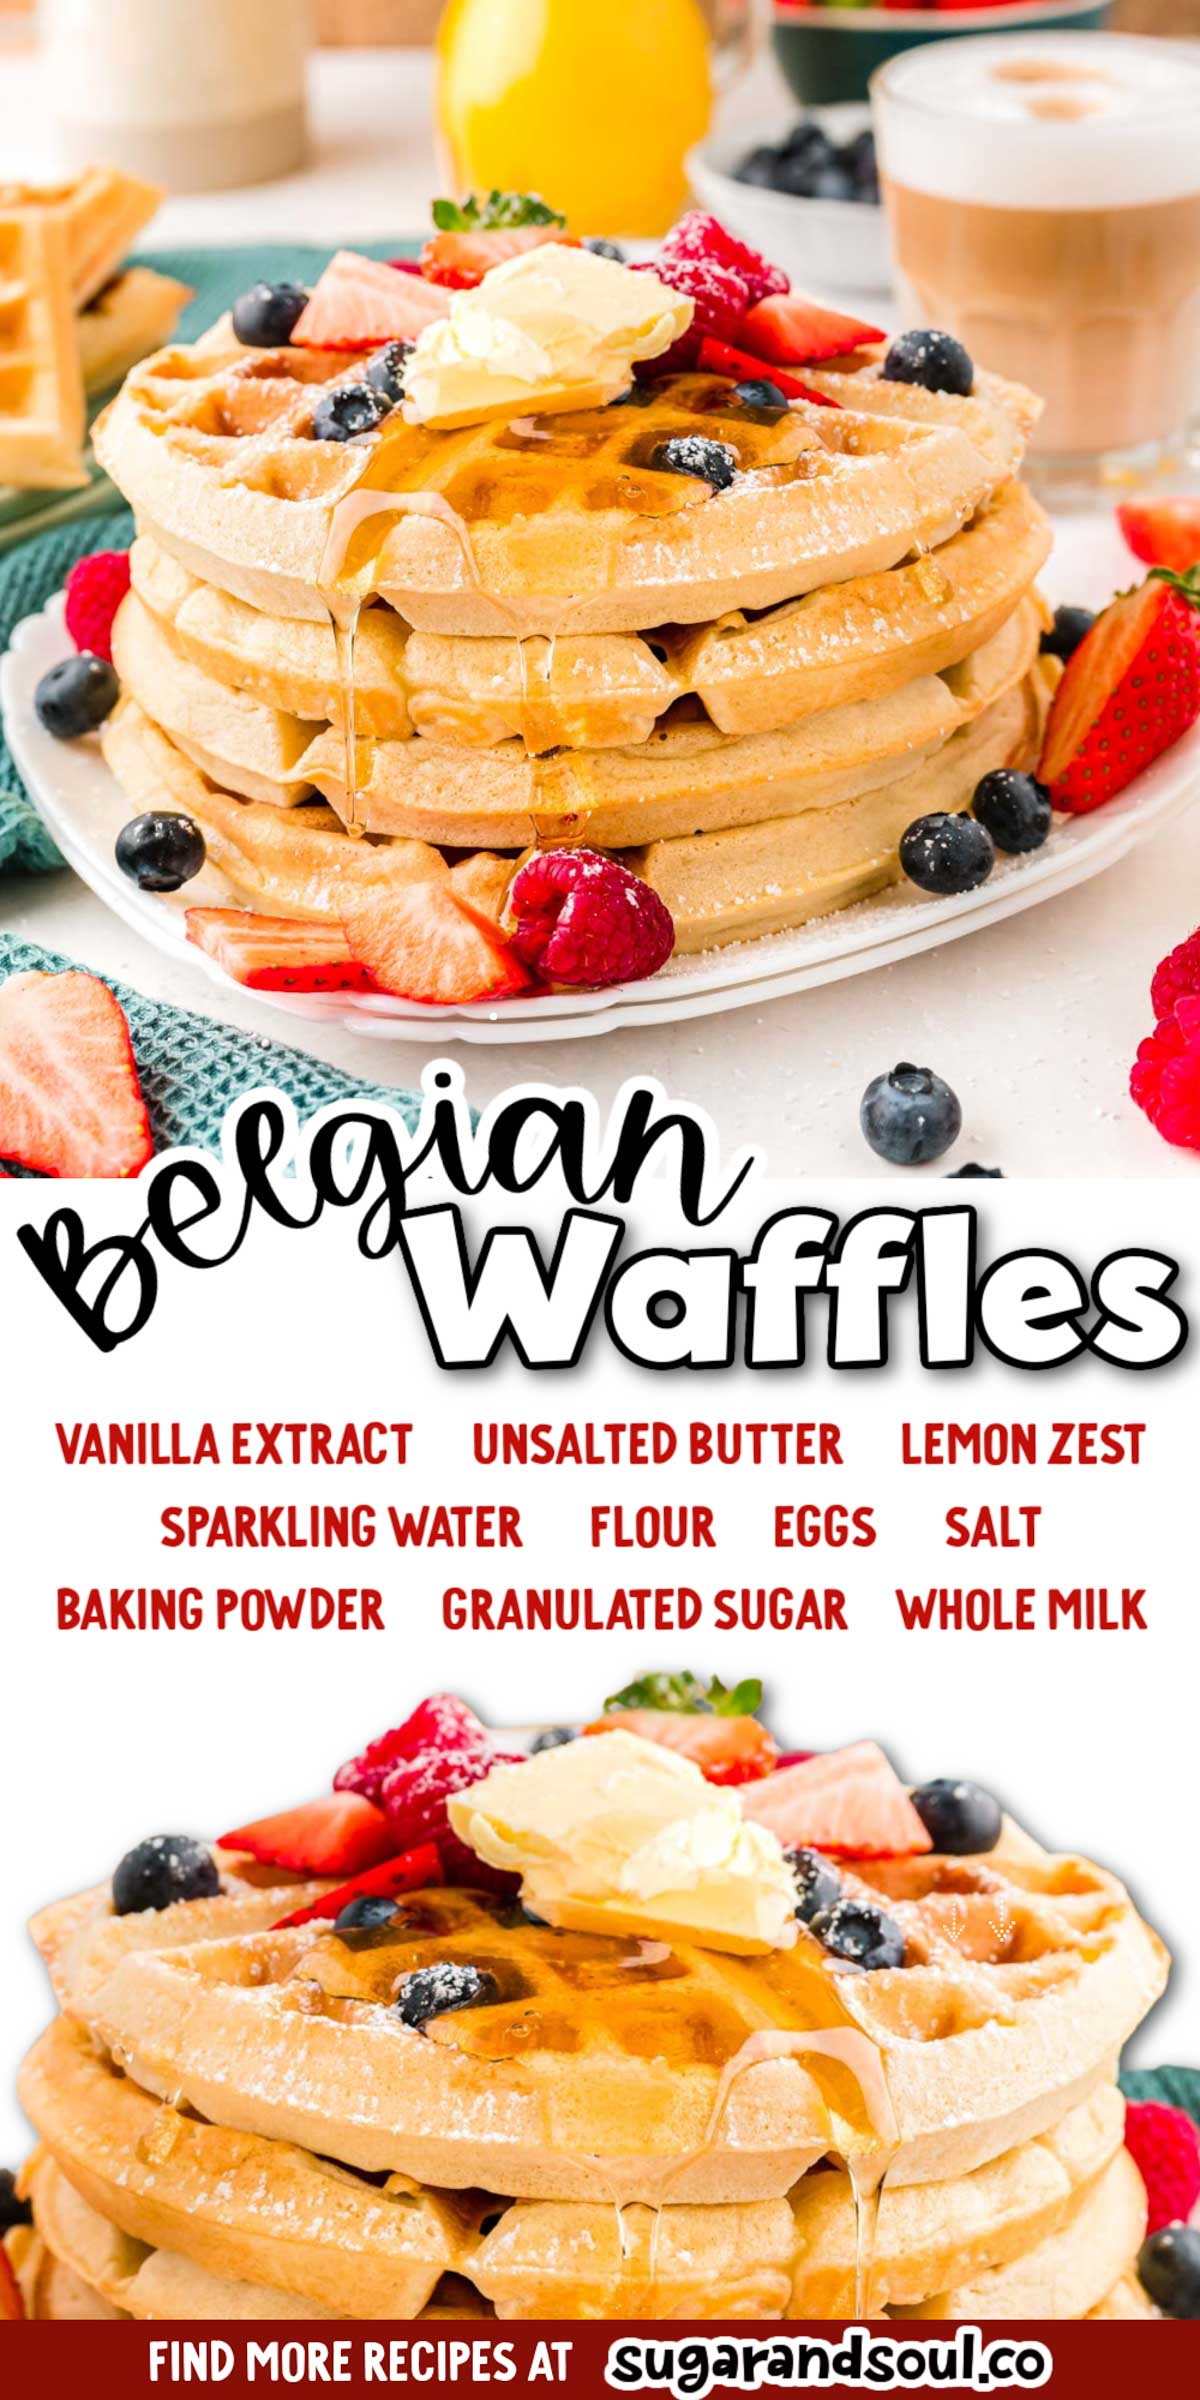 Belgian Waffles are made with sparkling water to create incredibly fluffy waffles that are perfect for covering in your favorite toppings! via @sugarandsoulco